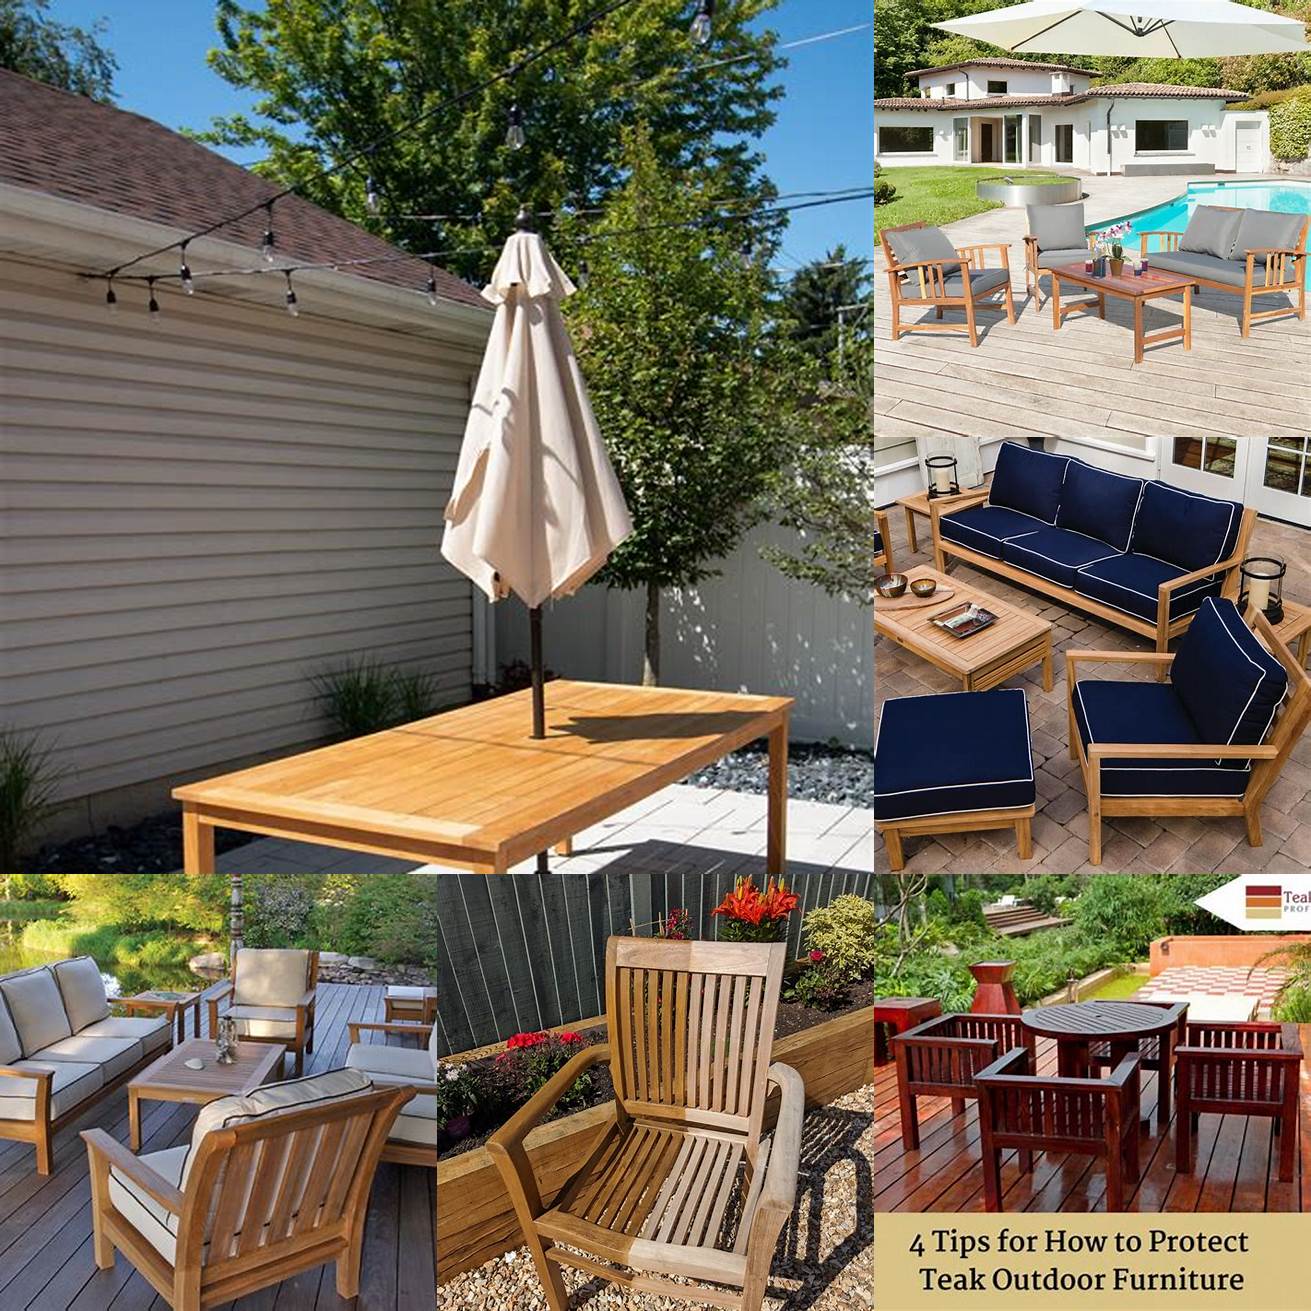 Protecting Teak Outdoor Furniture from Weather